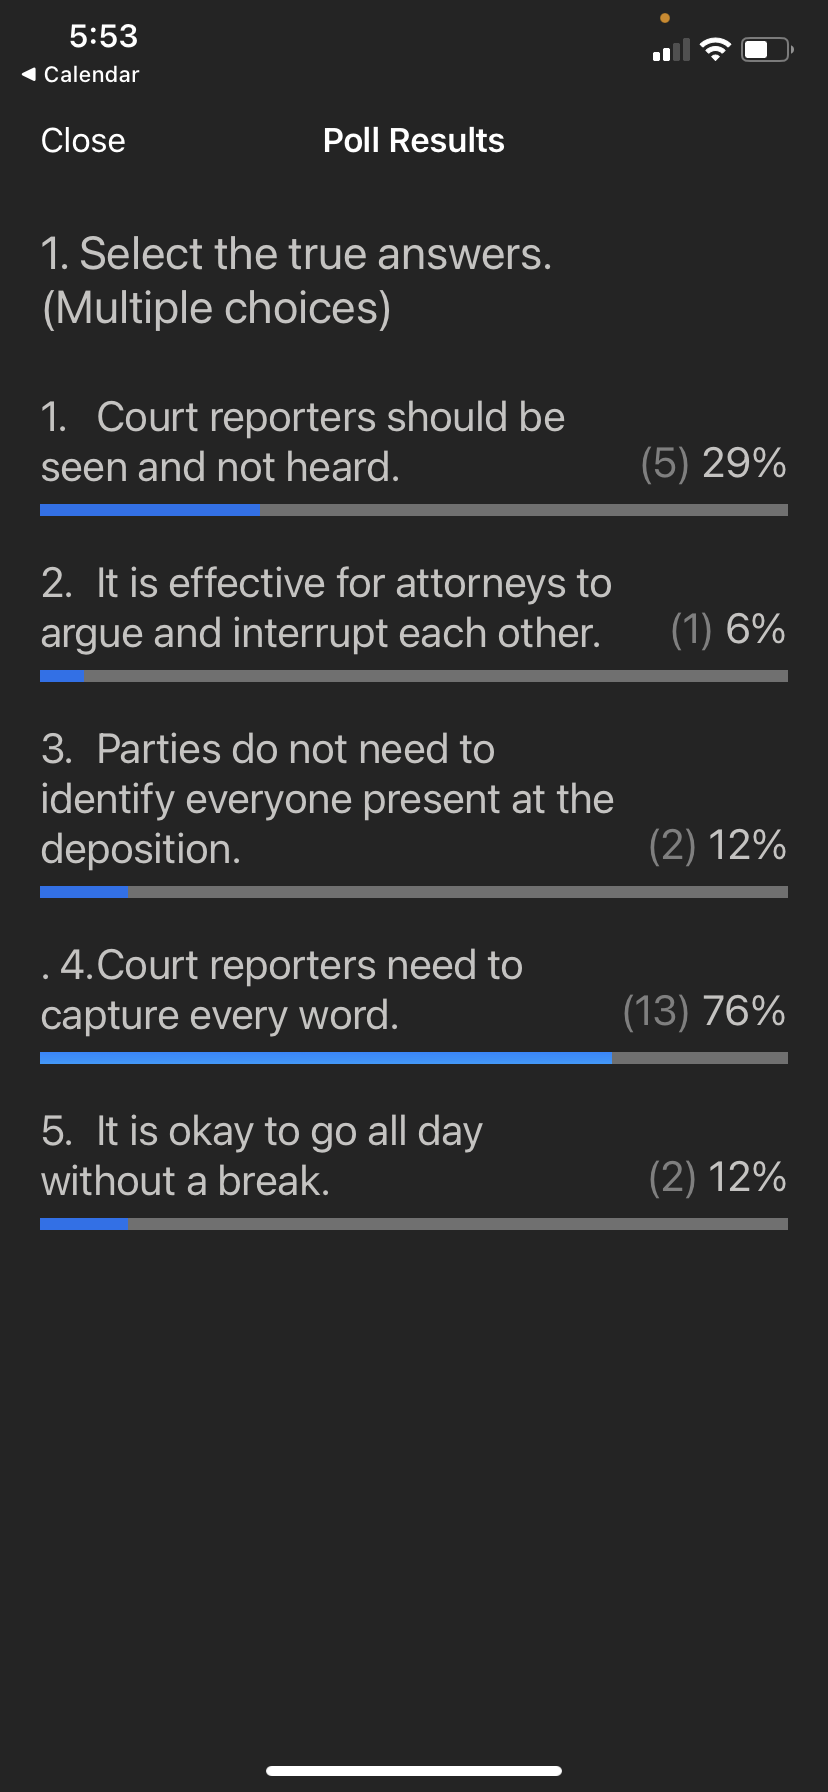 poll result by law student